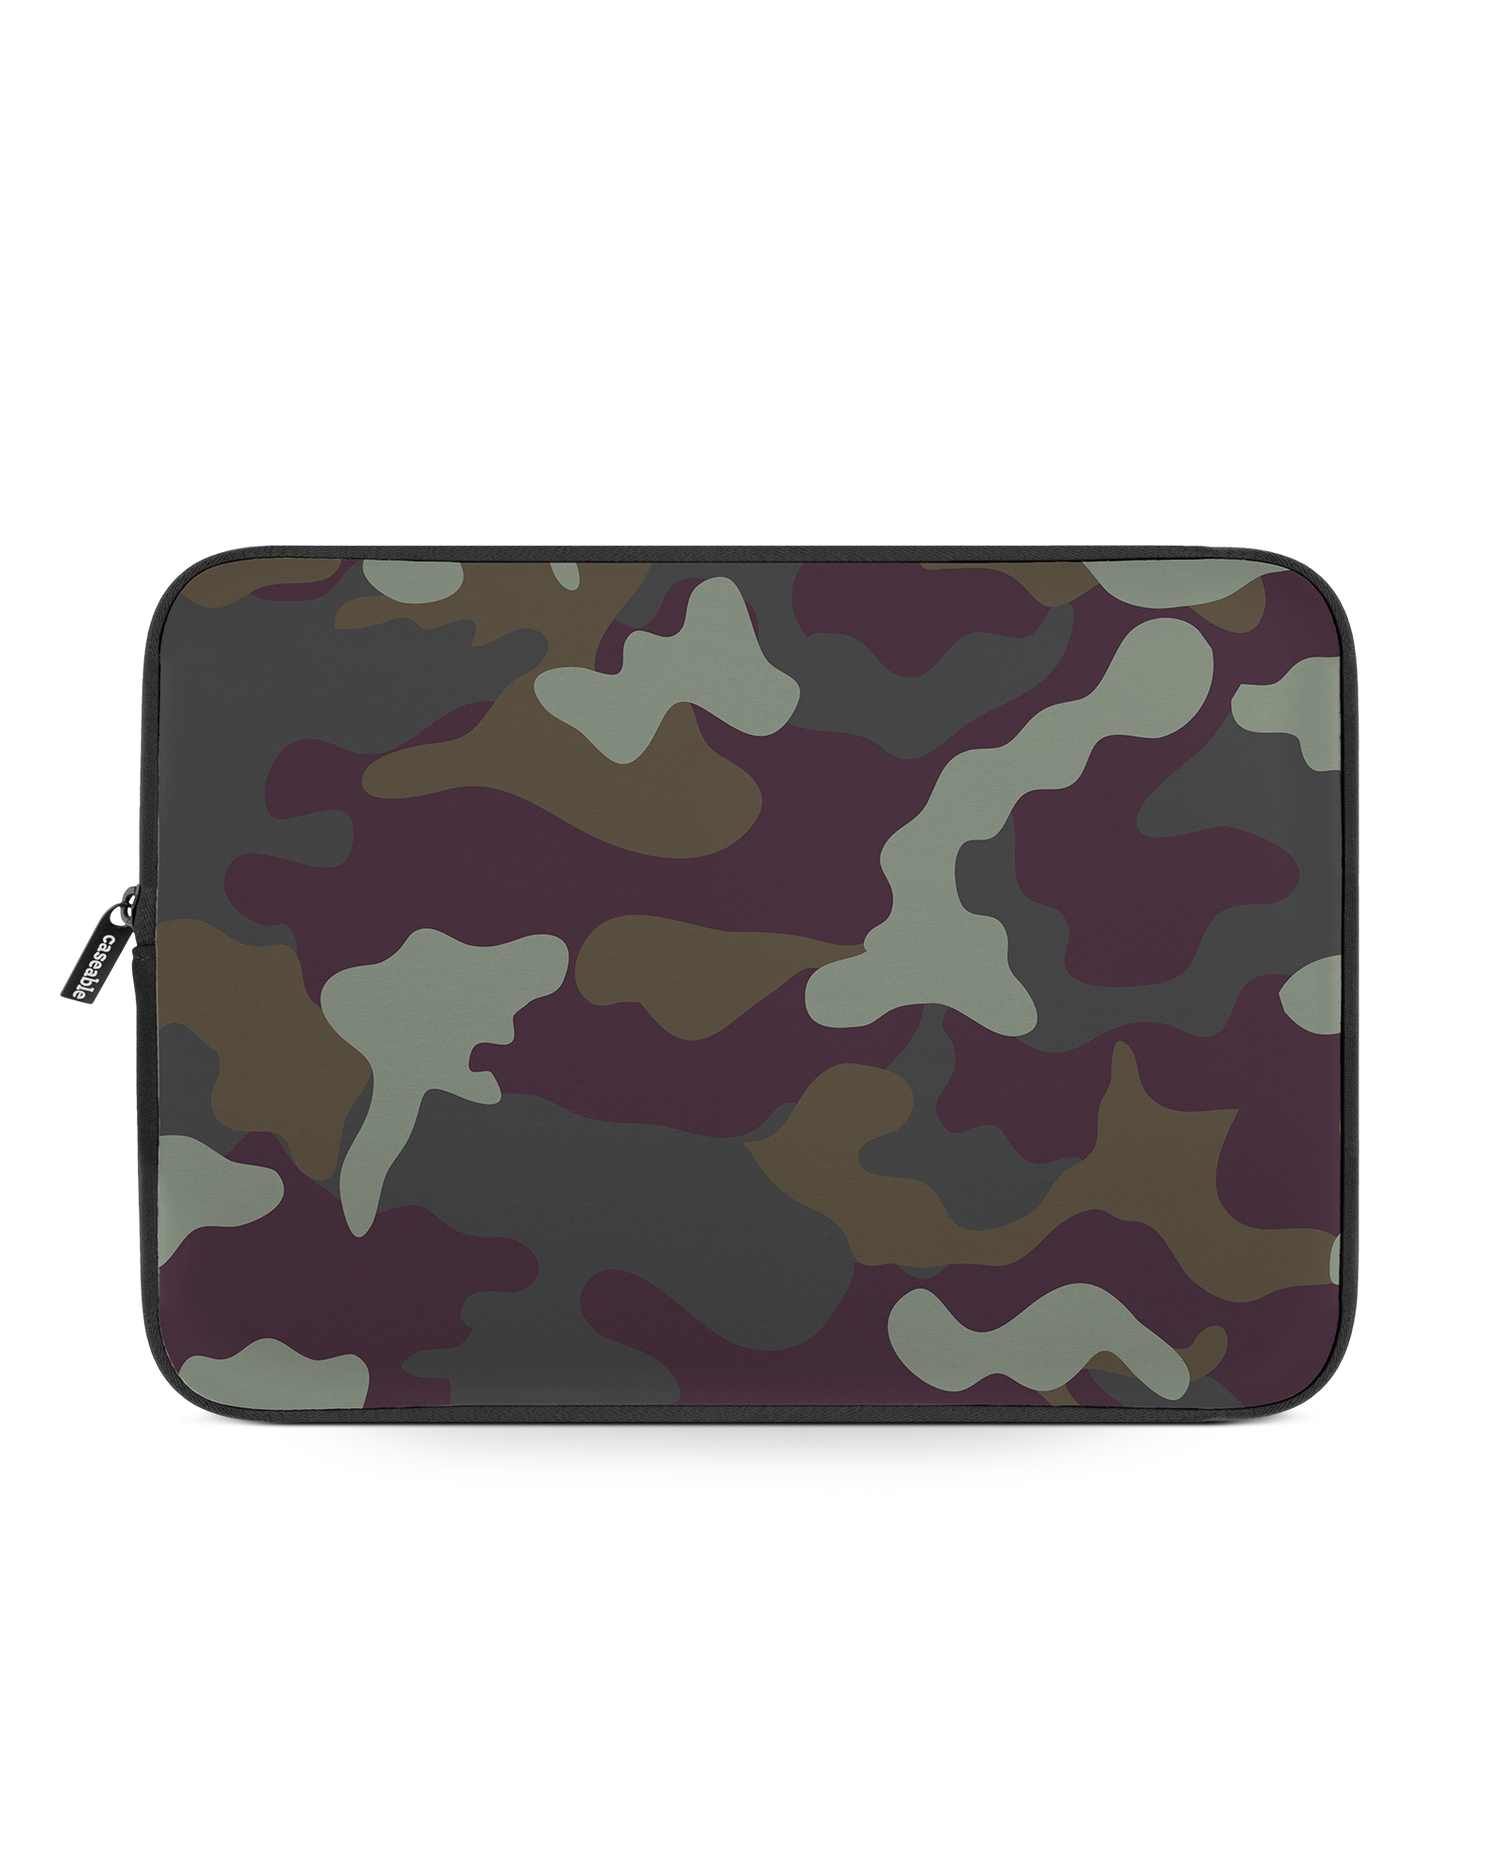 Night Camo Laptop Case 13-14 inch: Front View